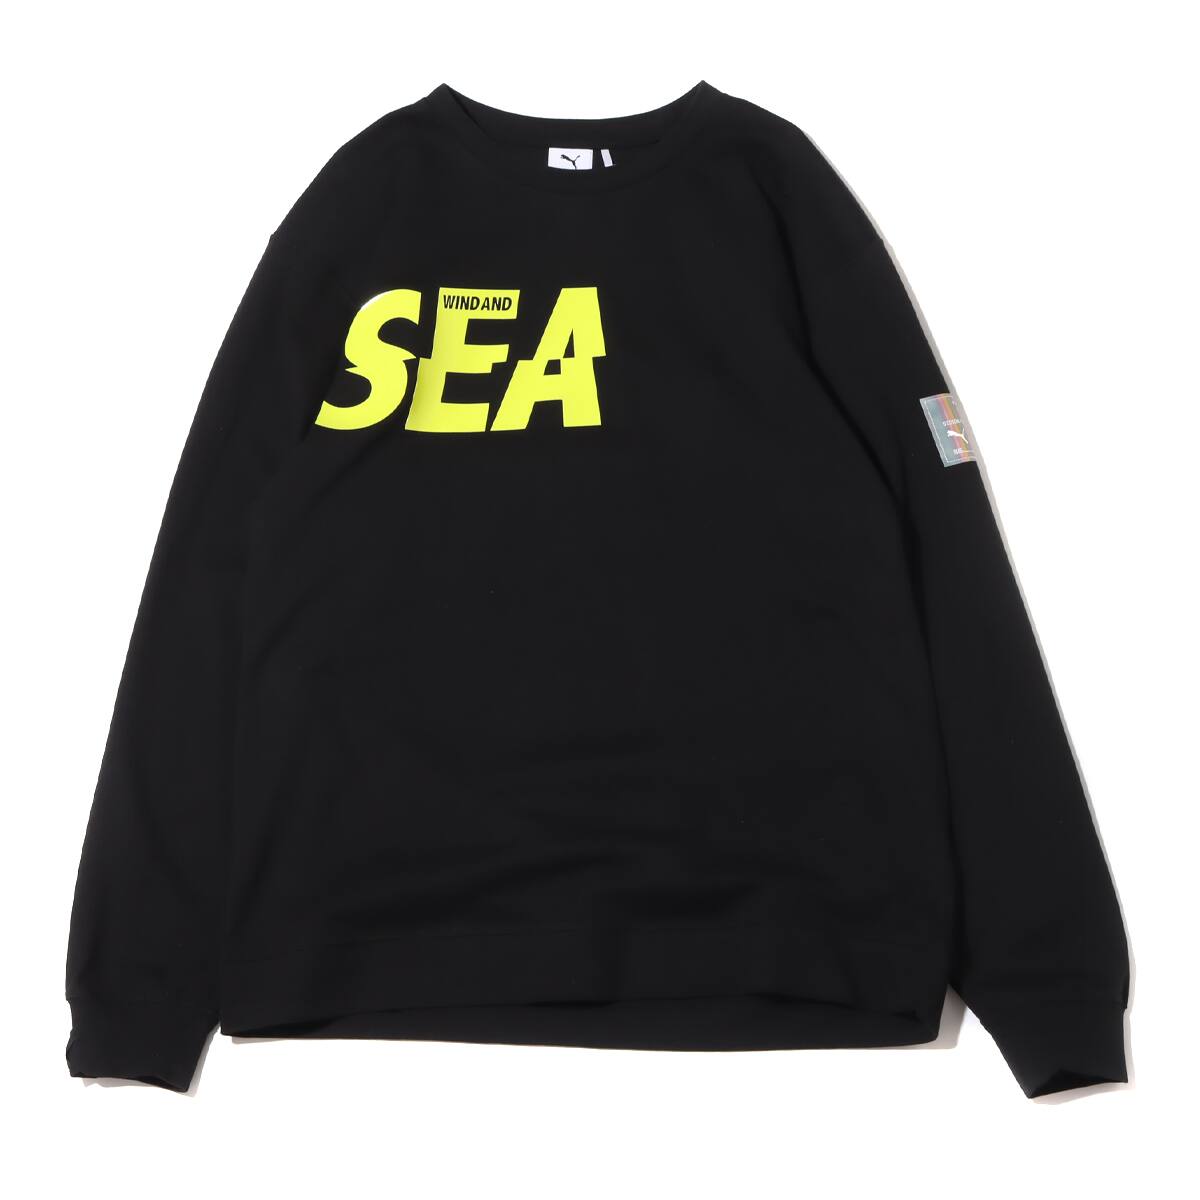 WIND AND SEA L/S T-SHIRTロンT - Tシャツ/カットソー(七分/長袖)